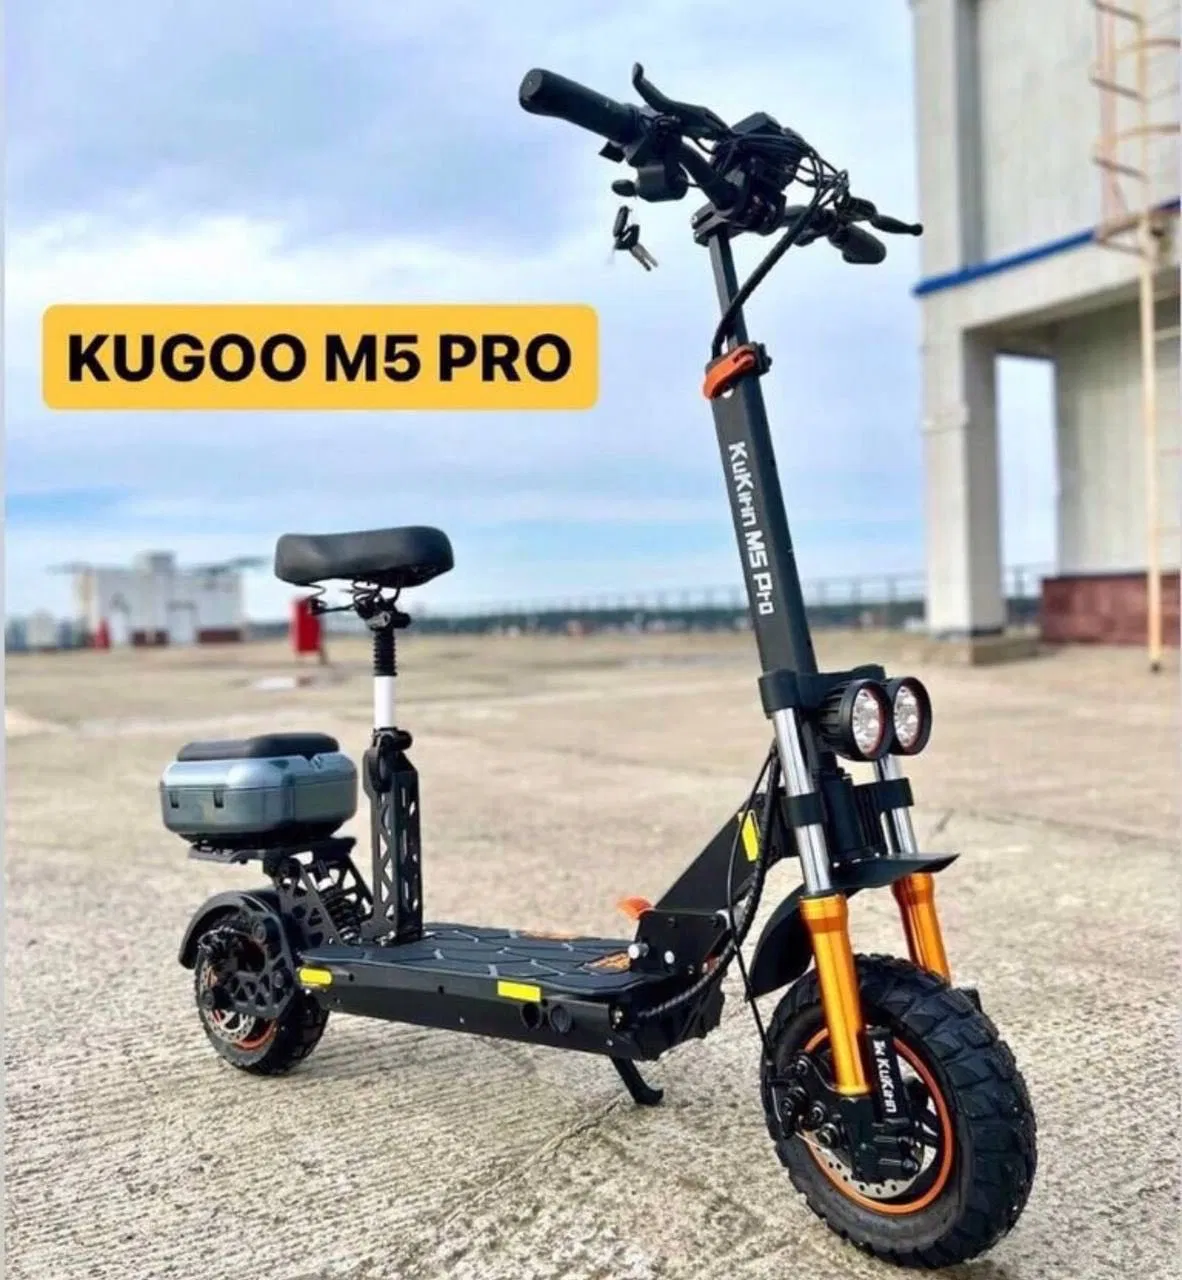 Kugoo M5 Pro 1200W 3-speed Mode Folding Electric Offroad Scooter with 11 inch Tires & LCD Display(Black) – 3 Months Free Warranty